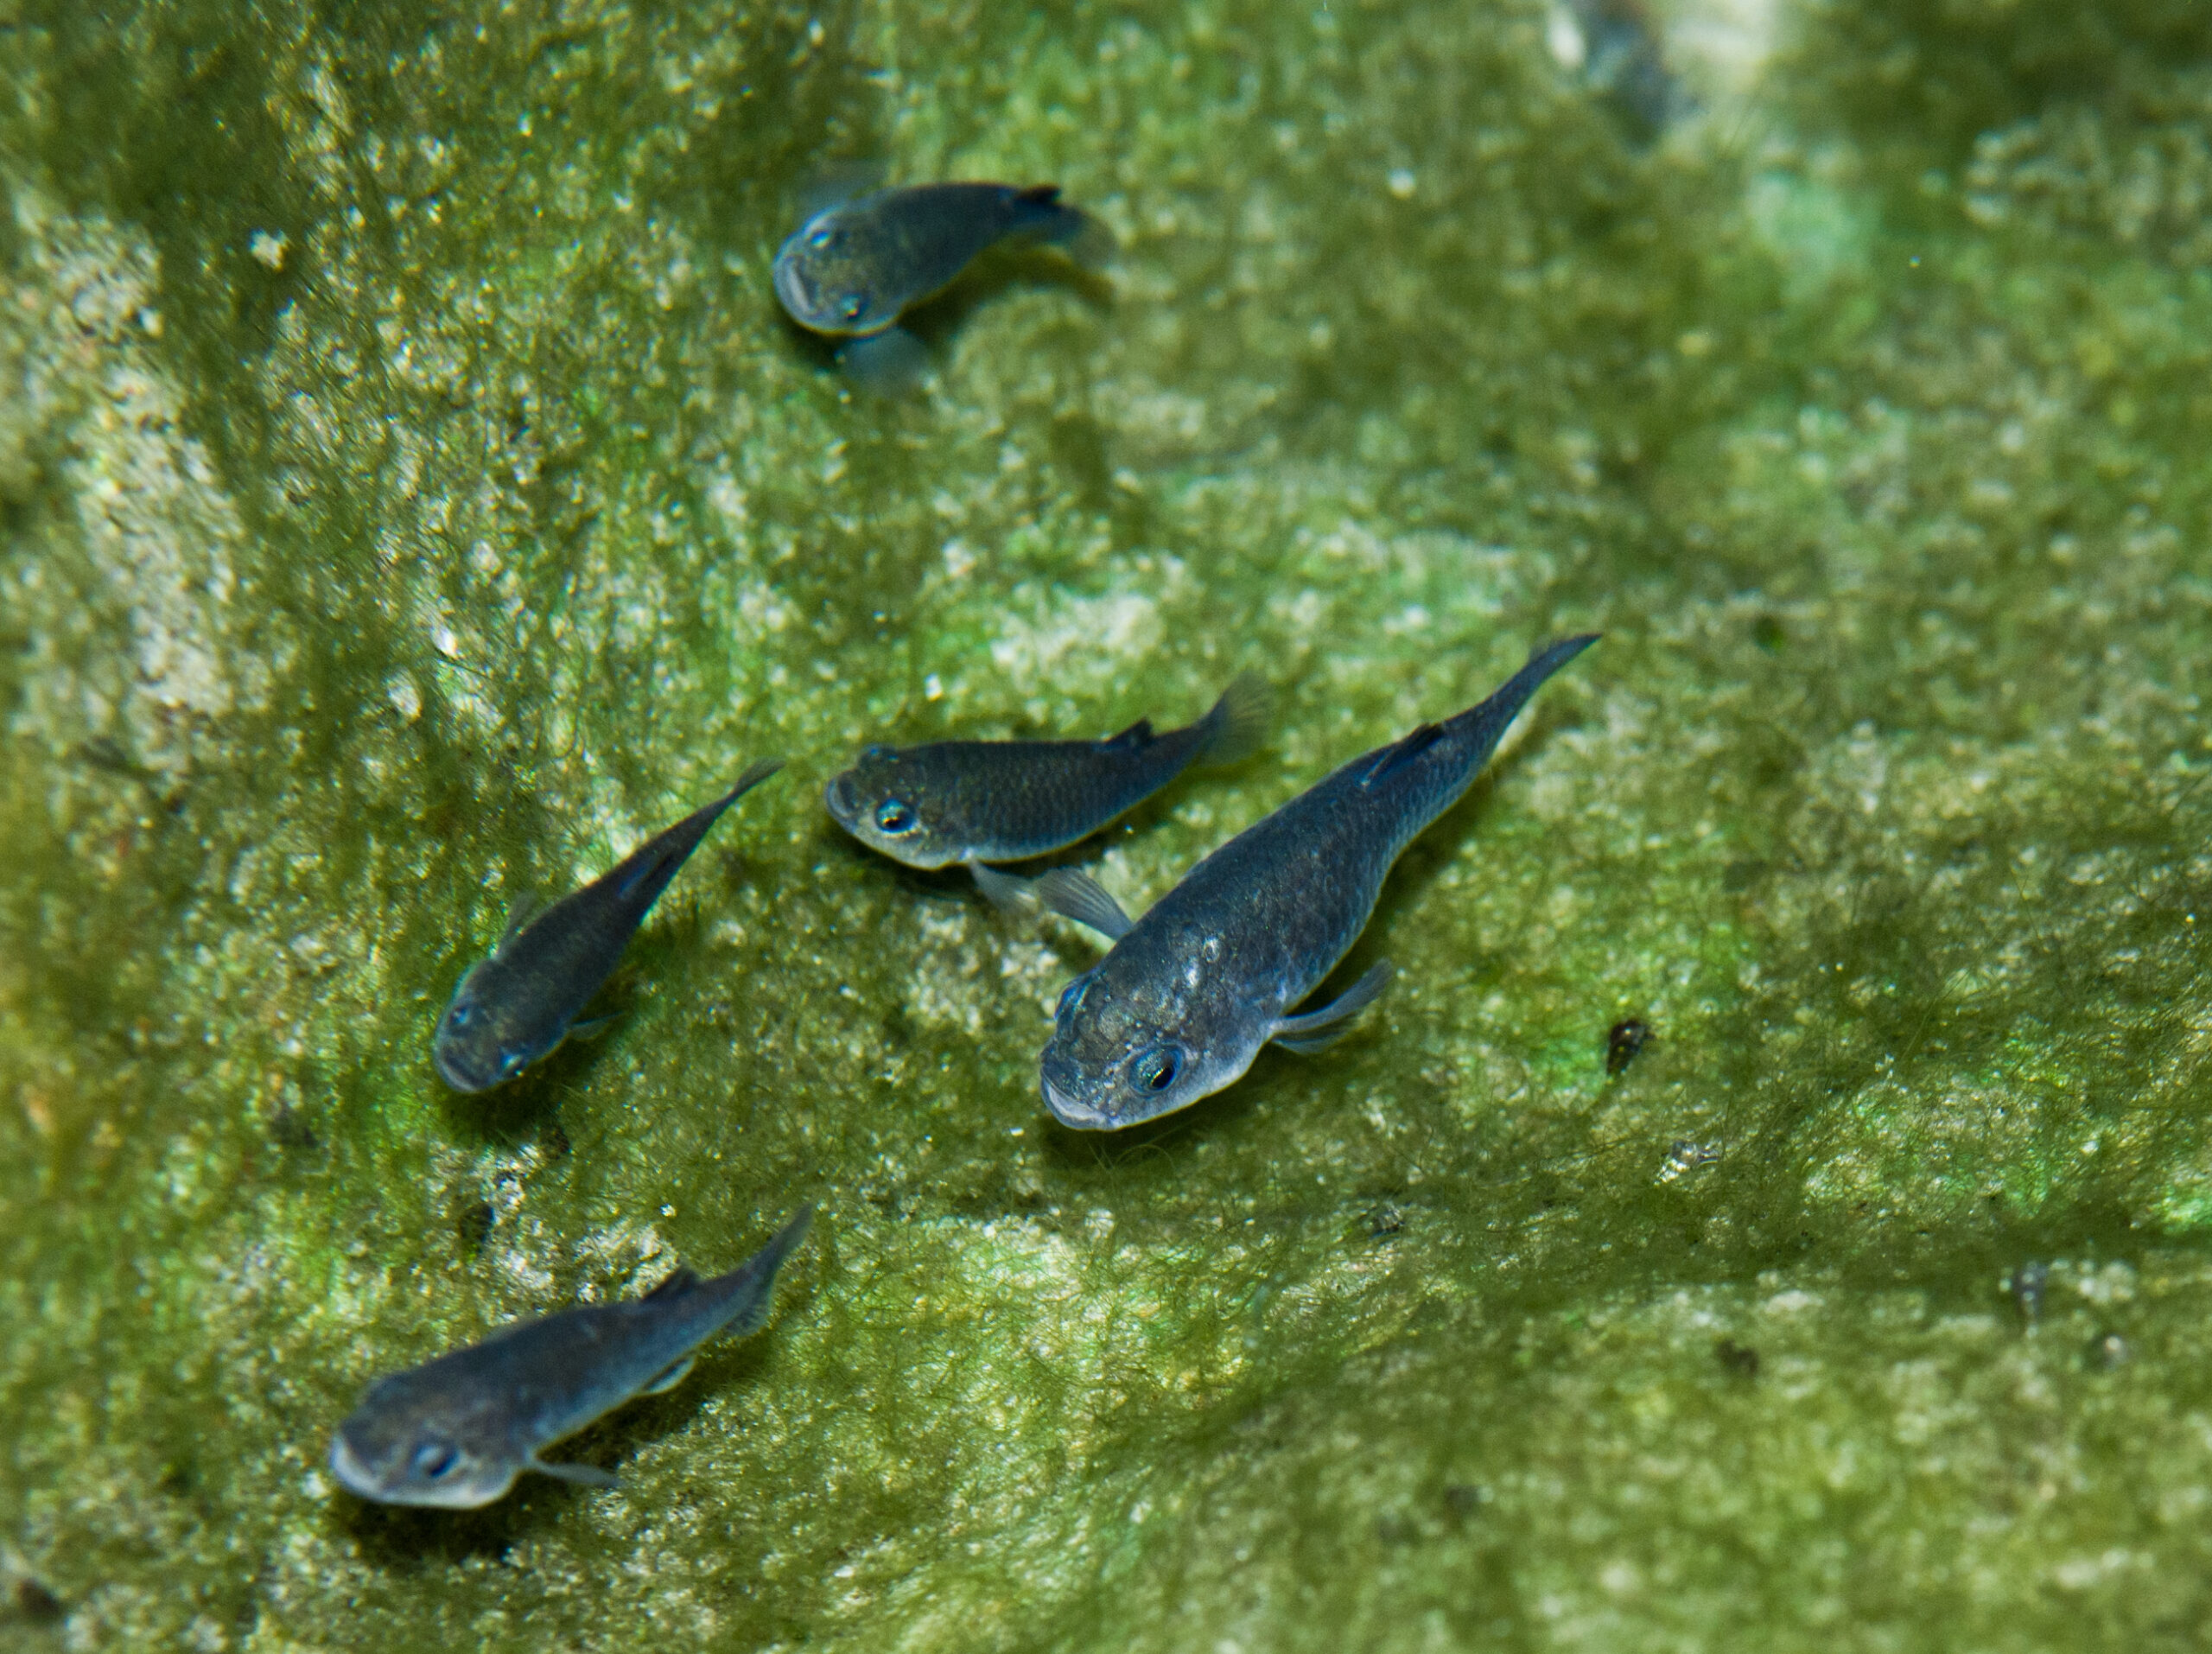 Devils Hole pupfish were named for their puppy-like behavior.